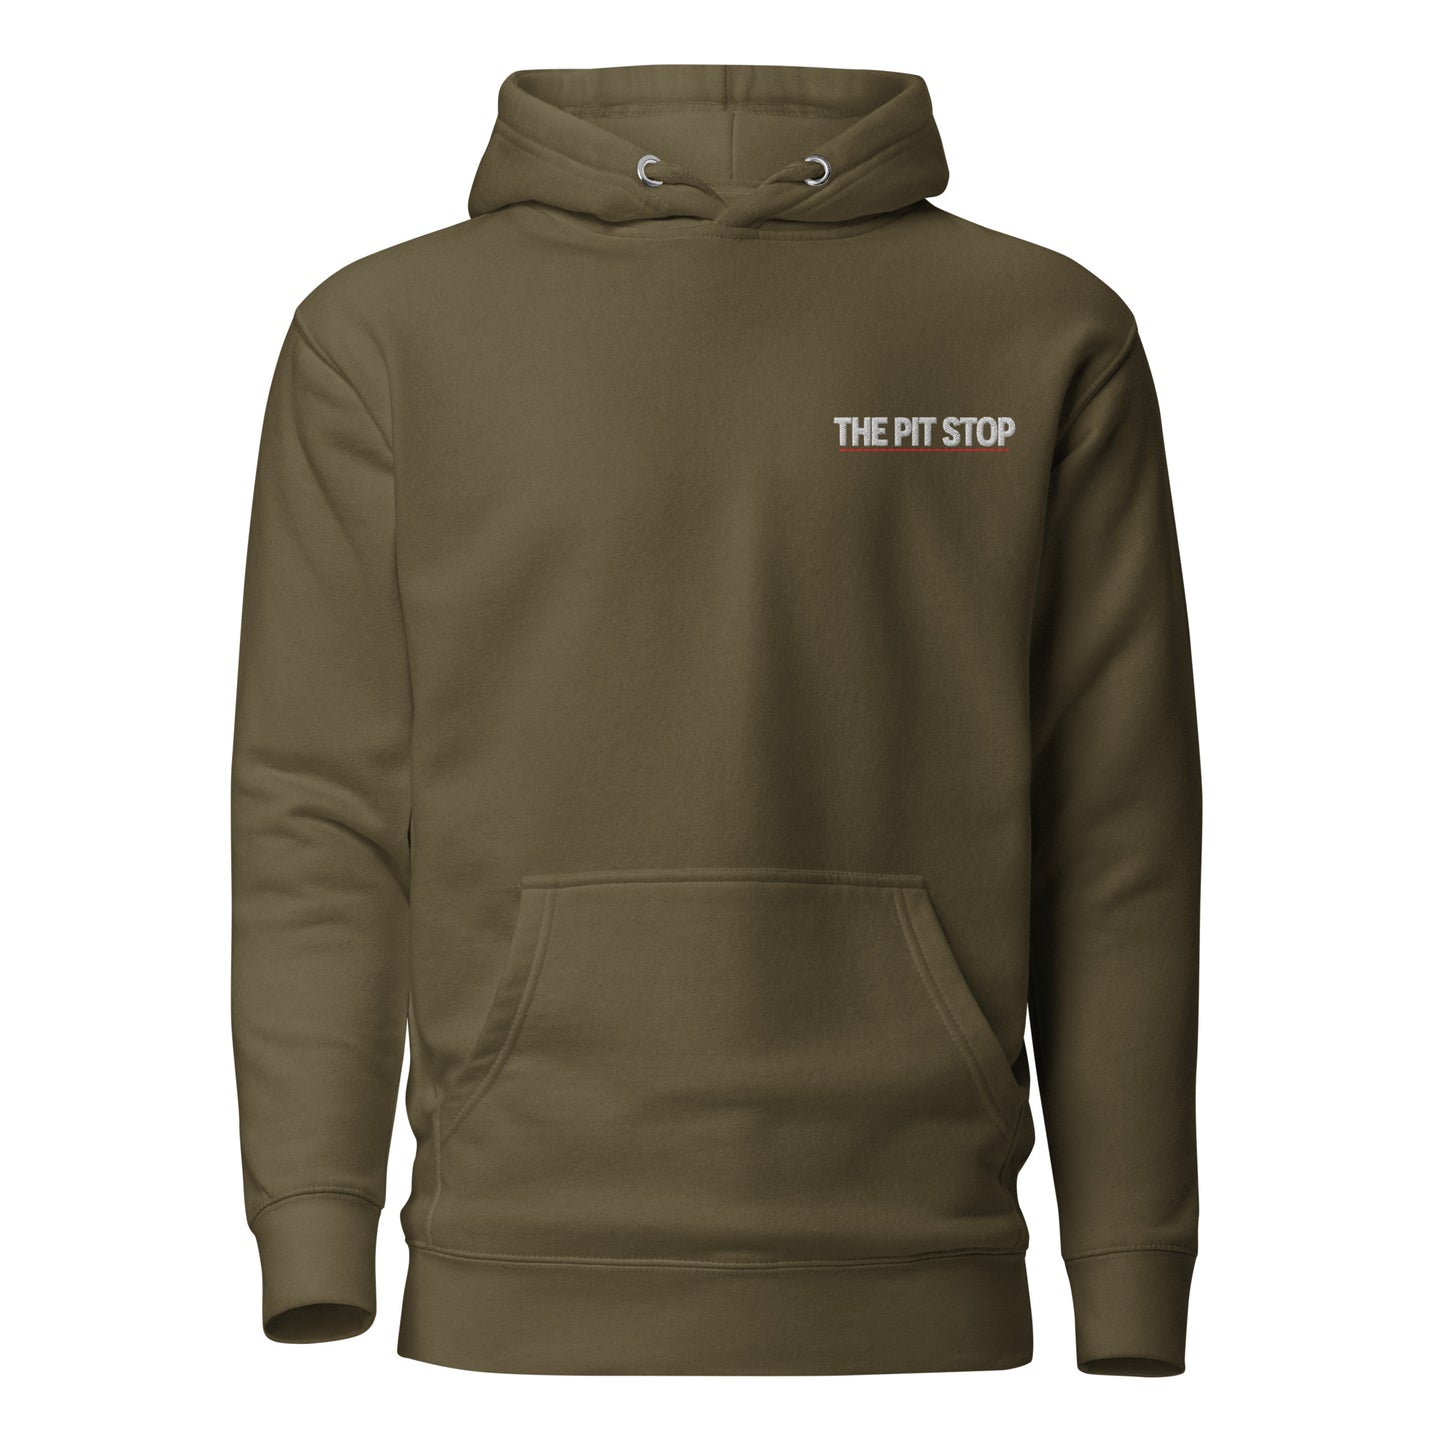 The Pit Stop Hoodie